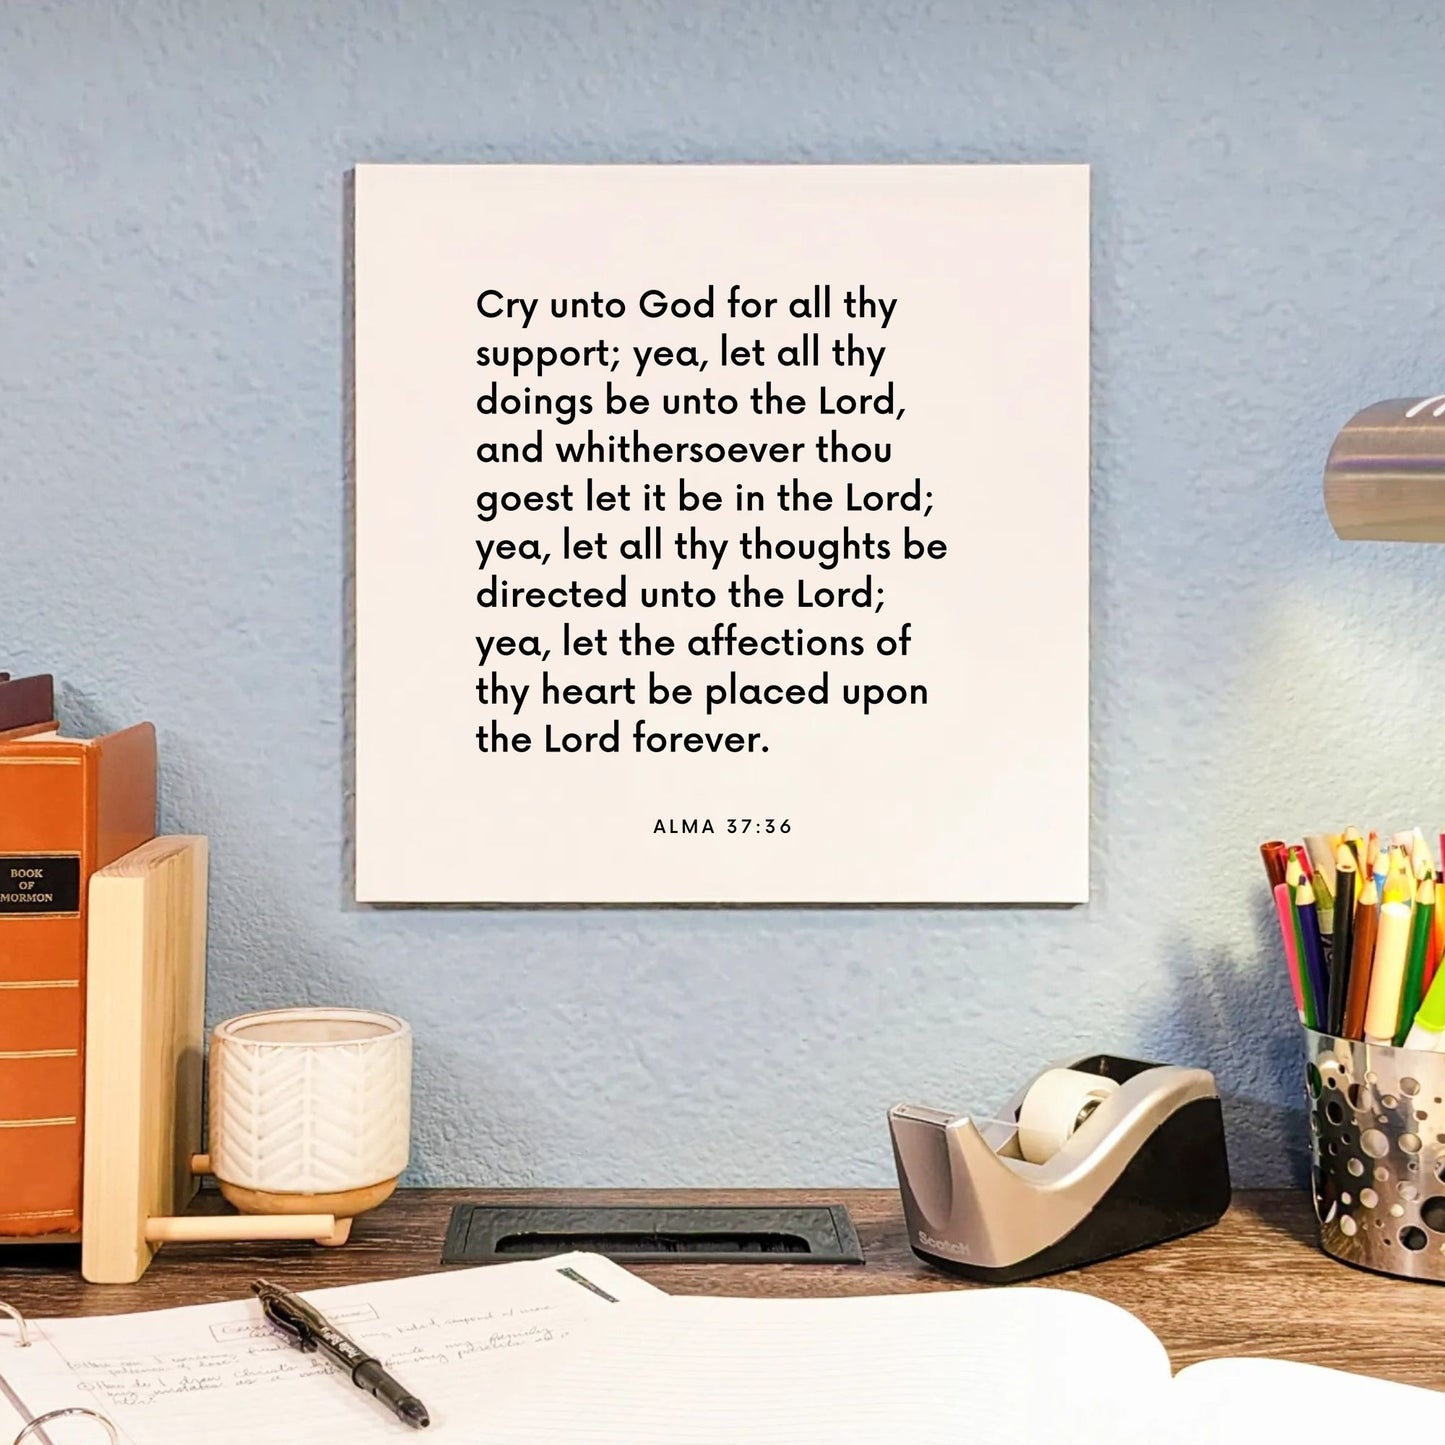 Desk mouting of the scripture tile for Alma 37:36 - "Cry unto God for all thy support"